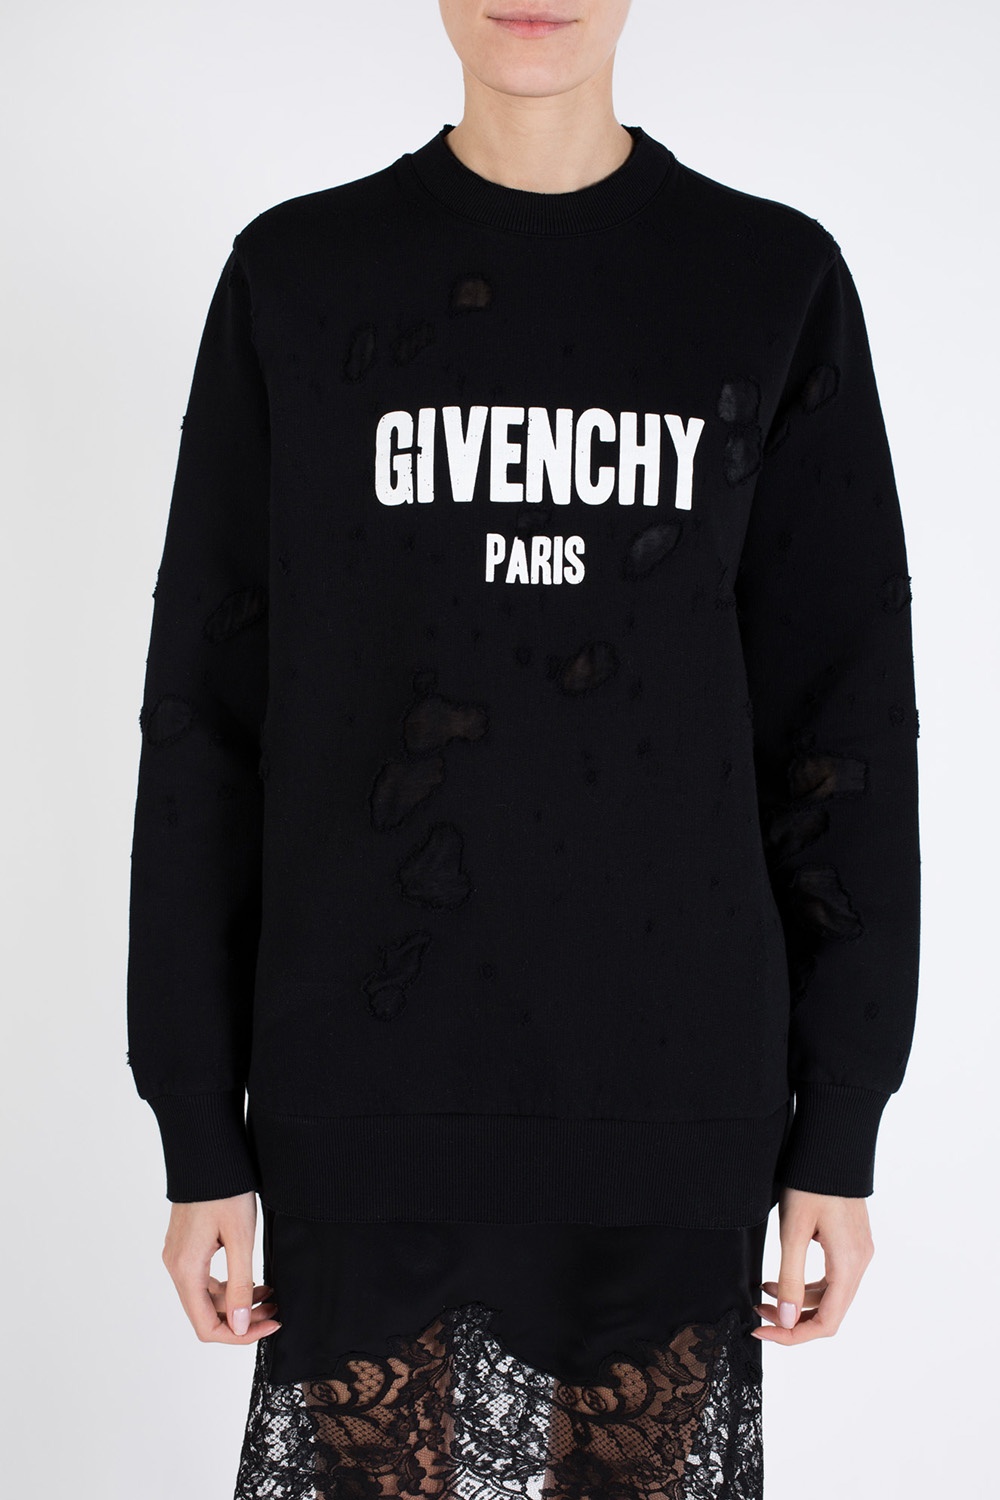 givenchy sweater with holes